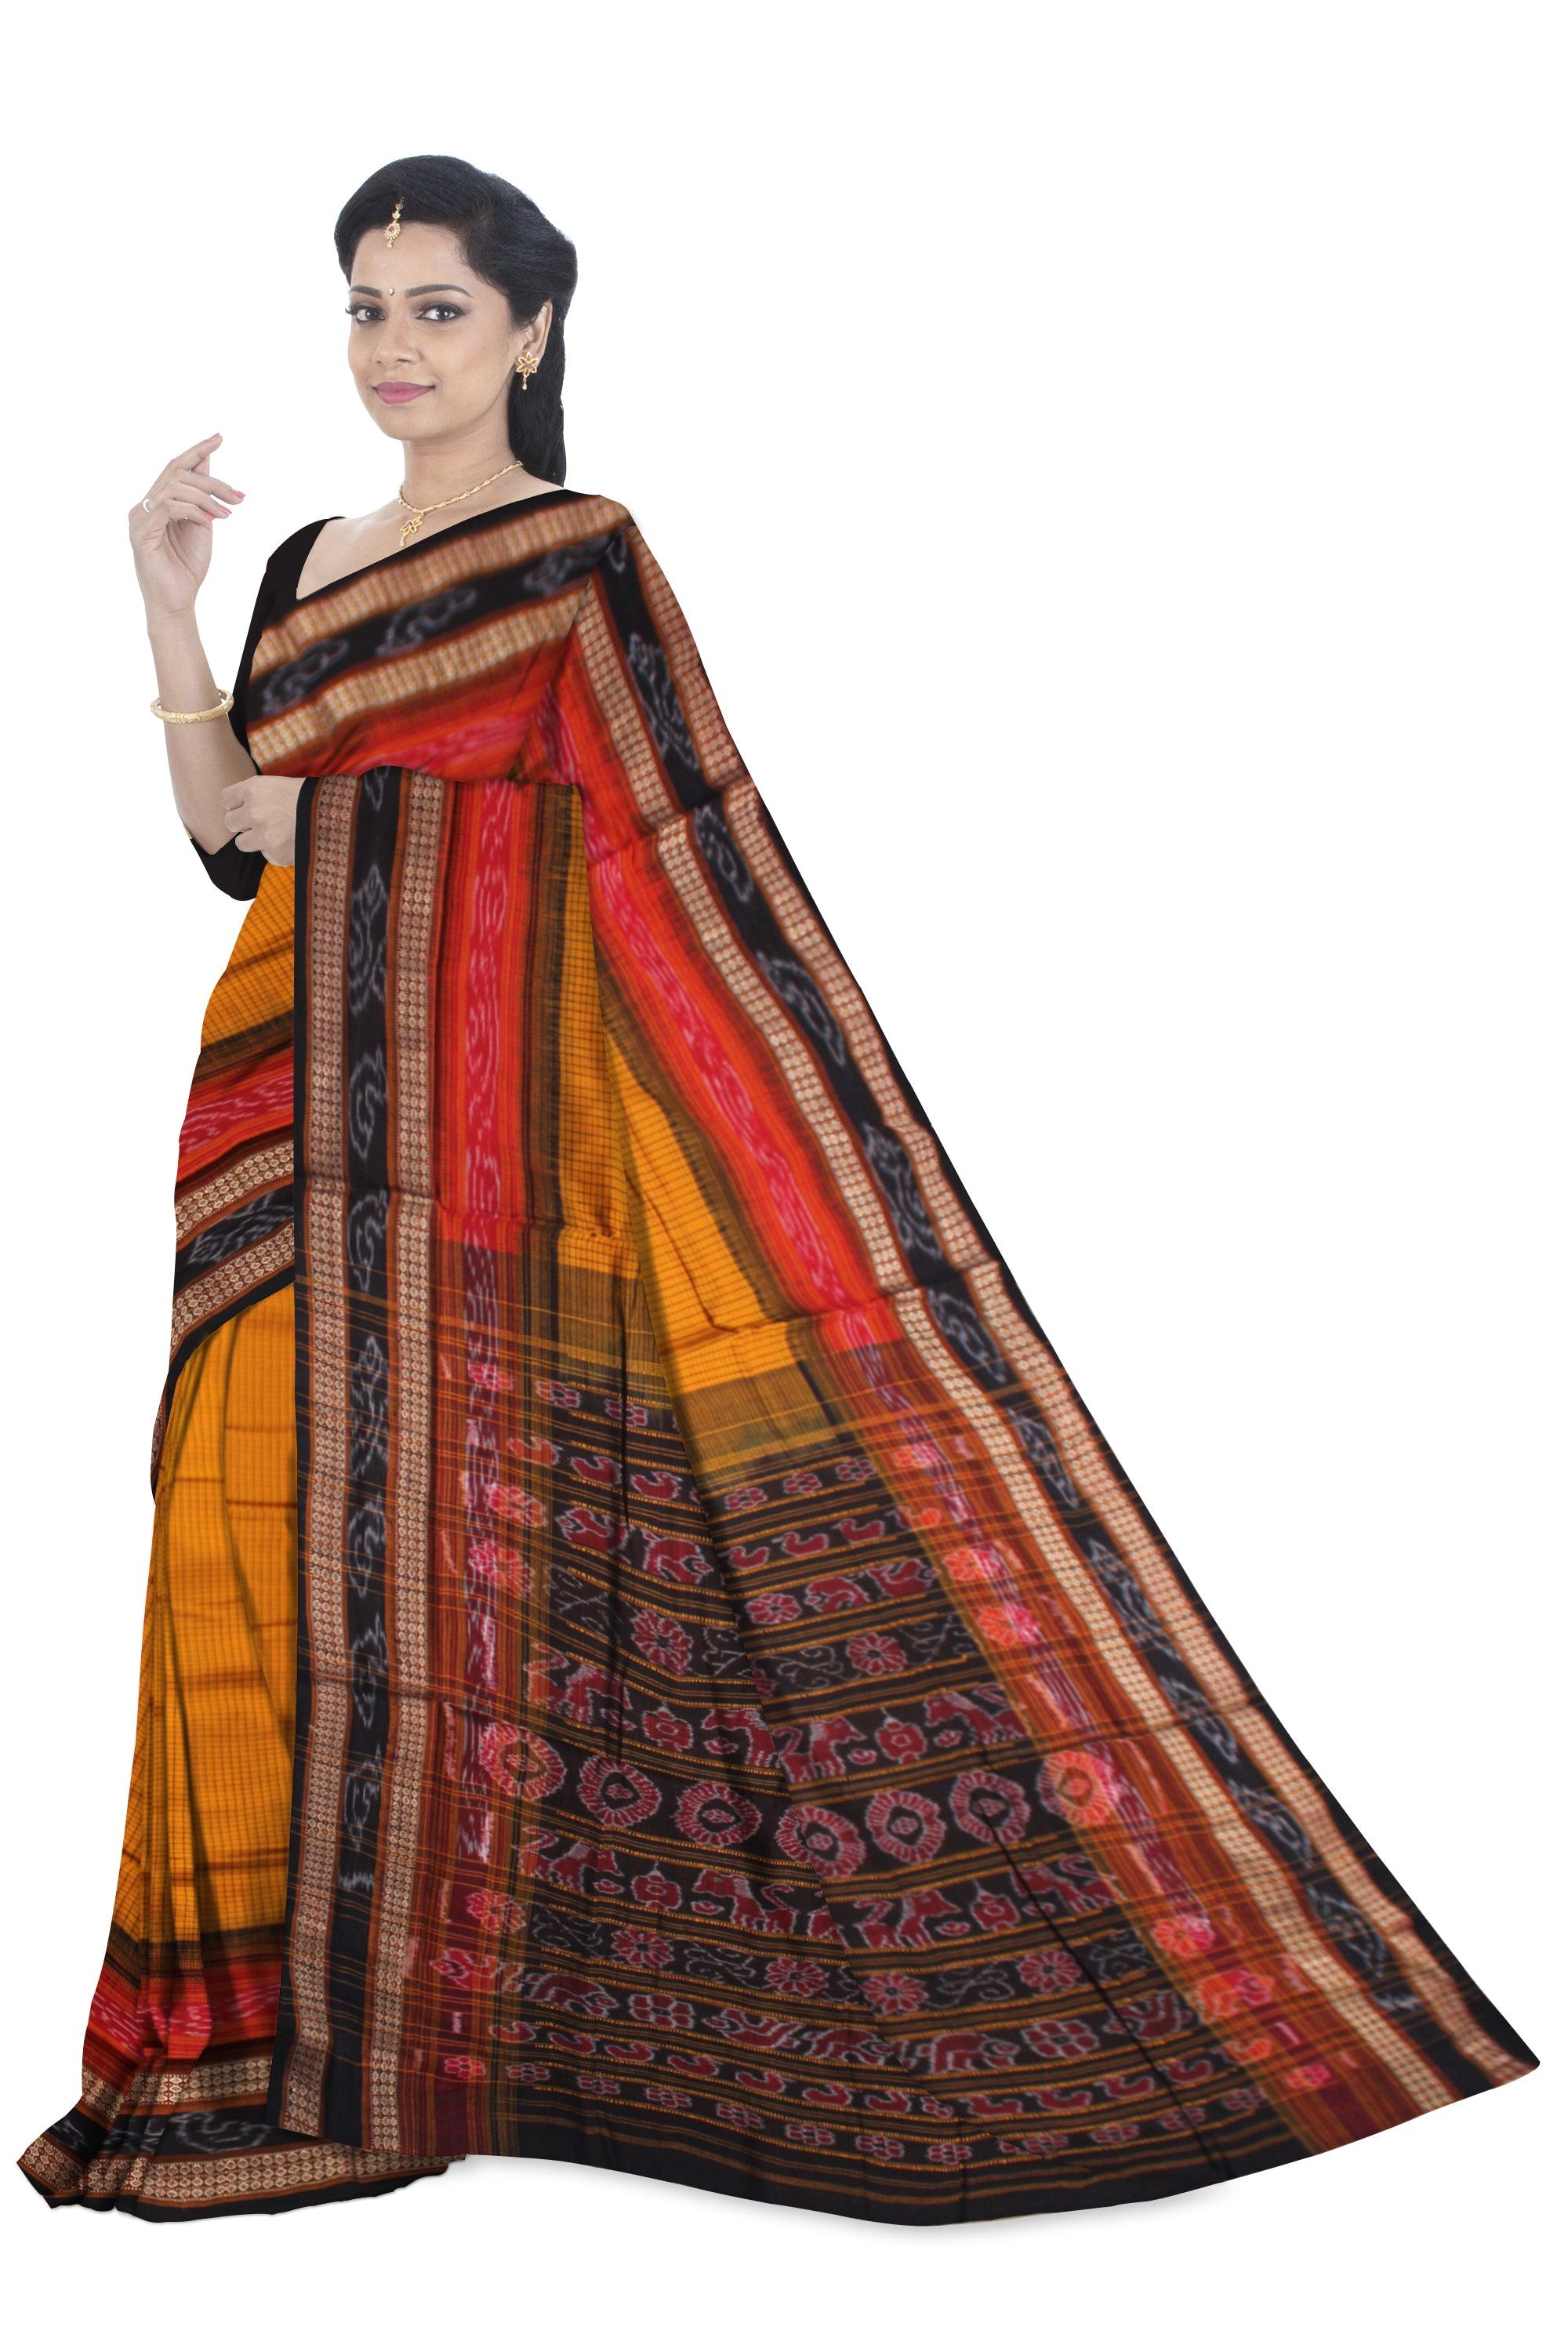 YELLOW, RED AND BLACK COLOR MIX SACHIPURI SAREE , WITH OUT BLOUSE PIECE. - Koshali Arts & Crafts Enterprise